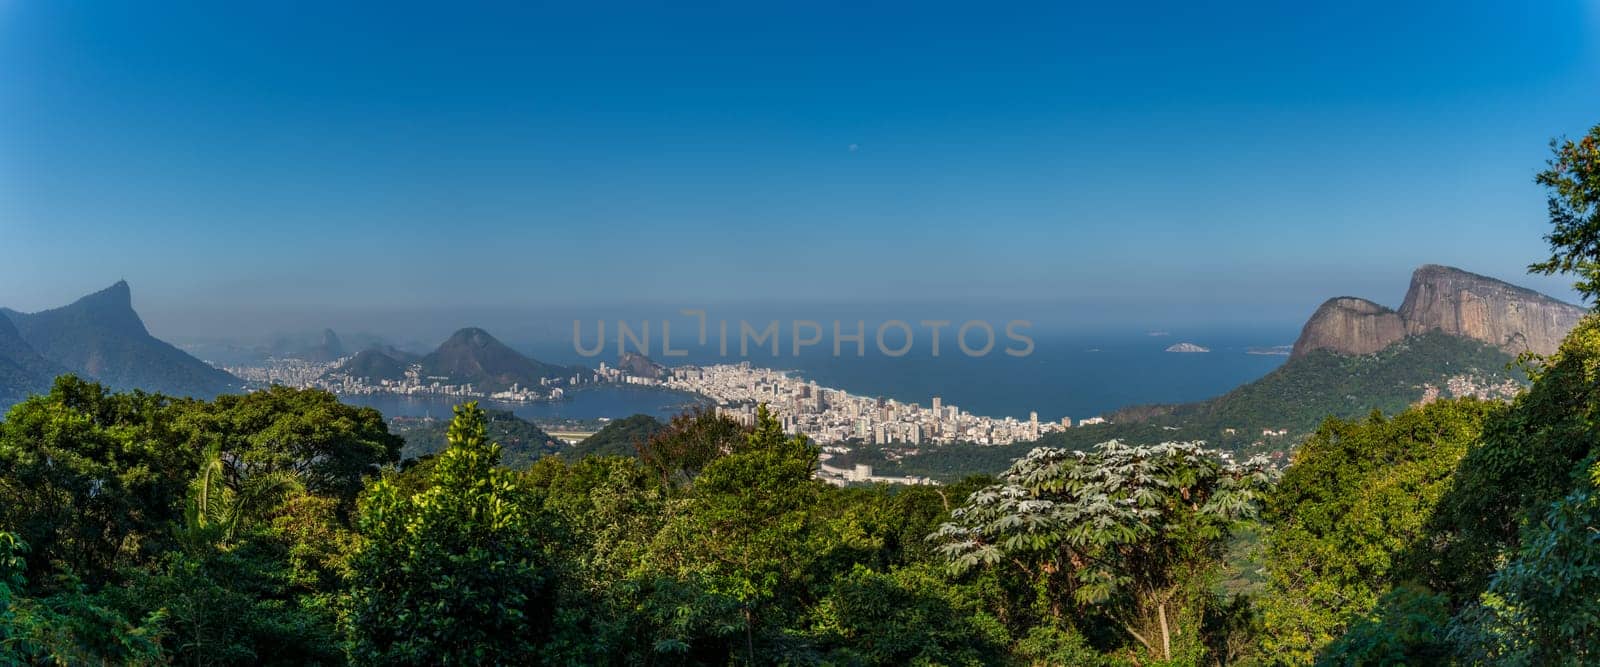 Stunning view of Rio's skyline and peaks under a clear blue sky.